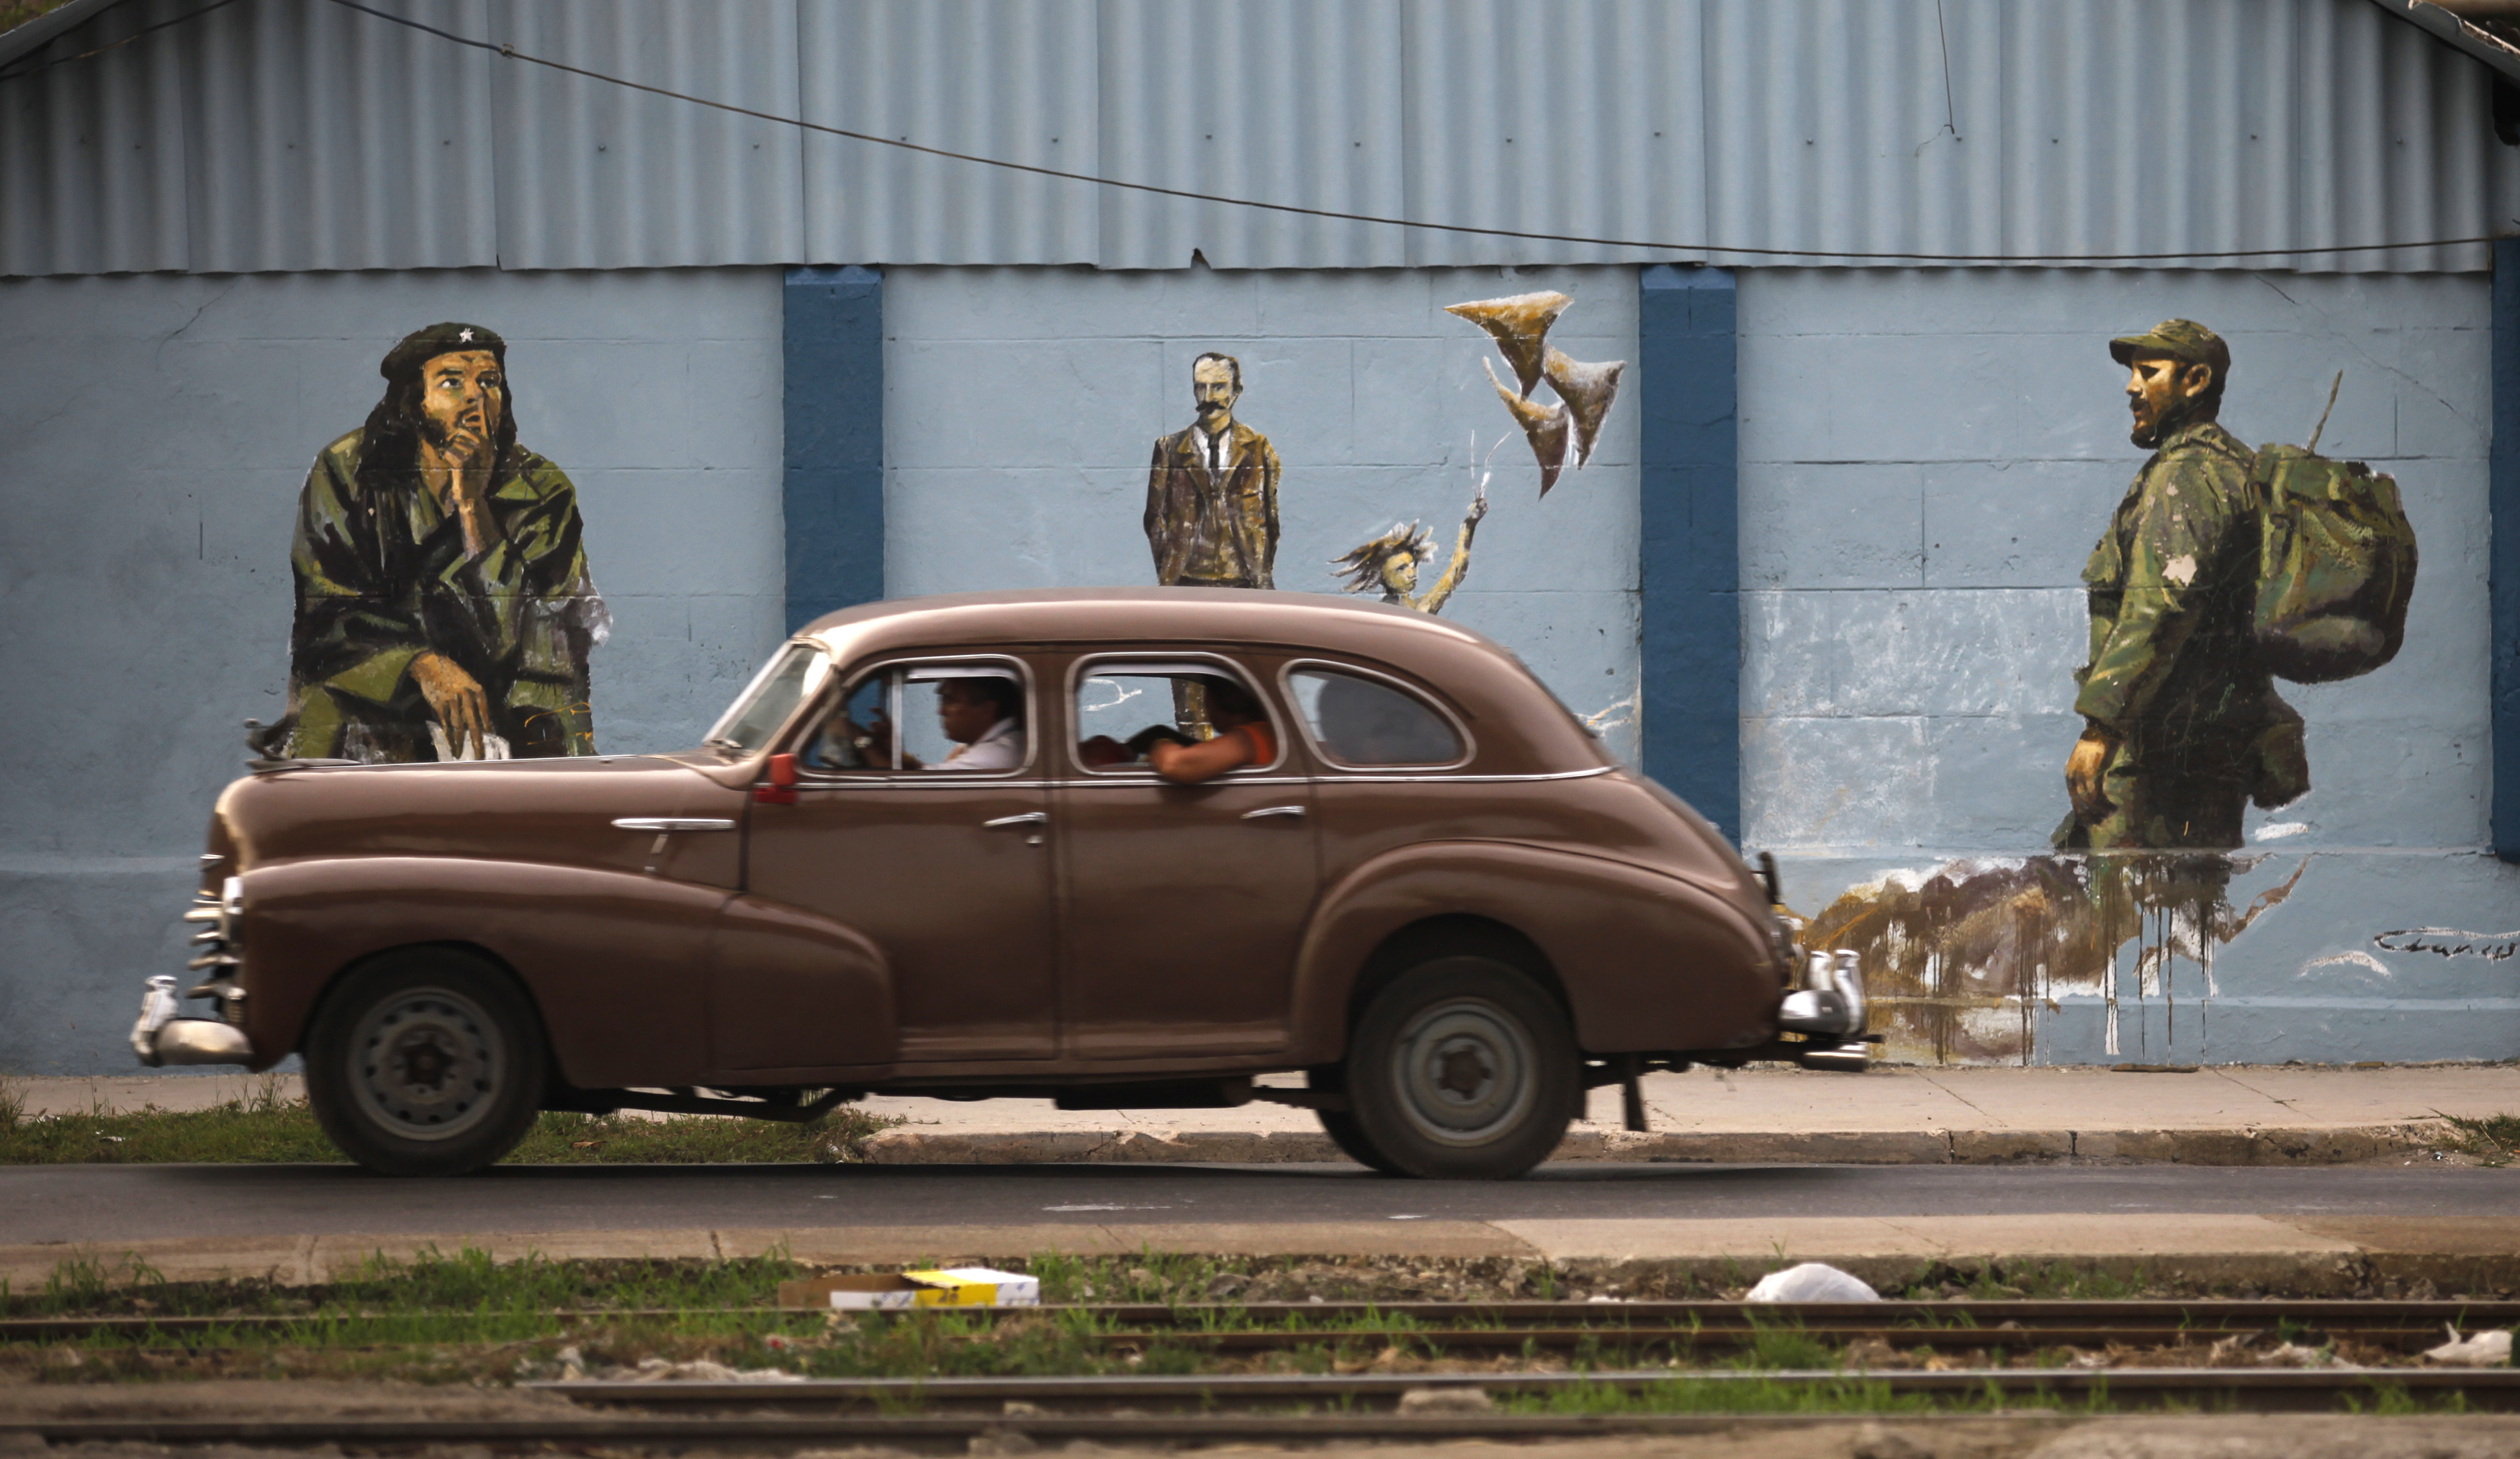 A vintage car drives by a mural showing Cuba's former leader Fidel Castro in Havana